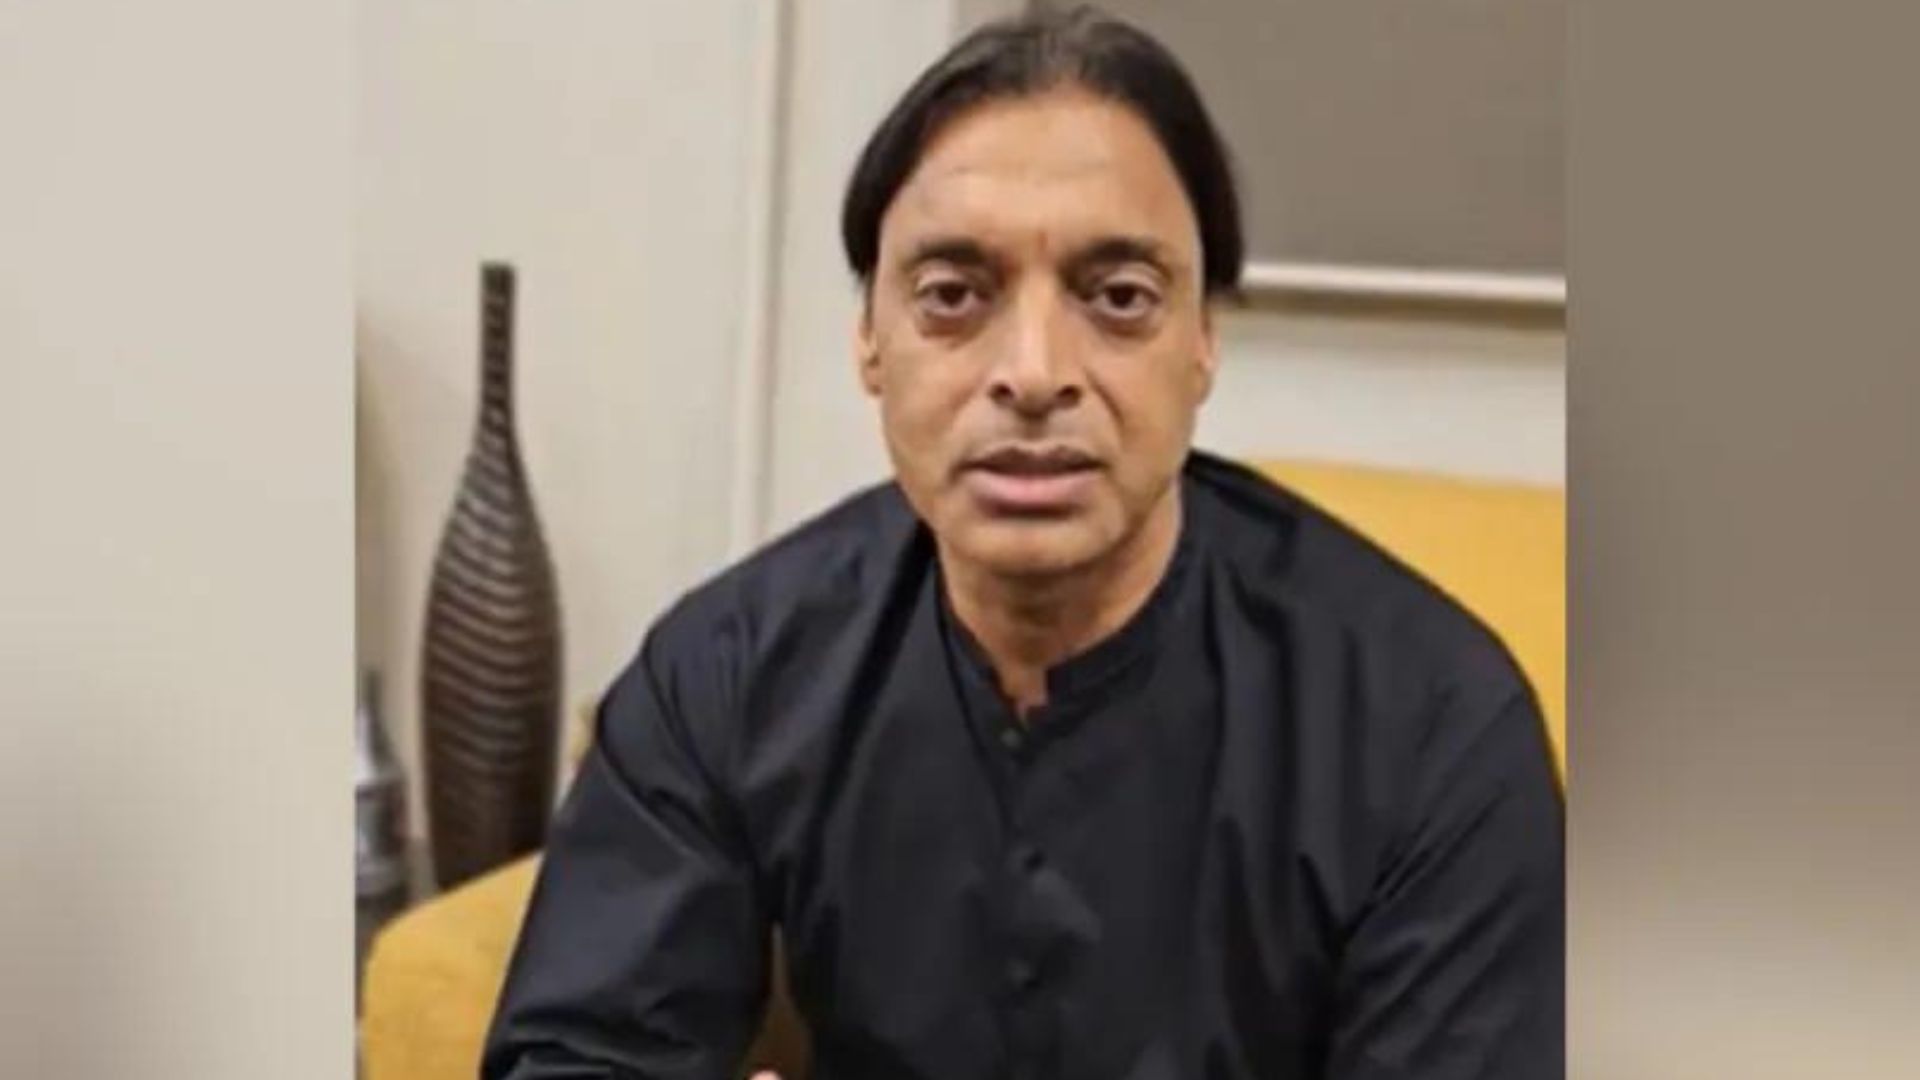 T20 World Cup: Shoaib Akhtar’s One Line Post Goes Viral After Pakistan’s Exit